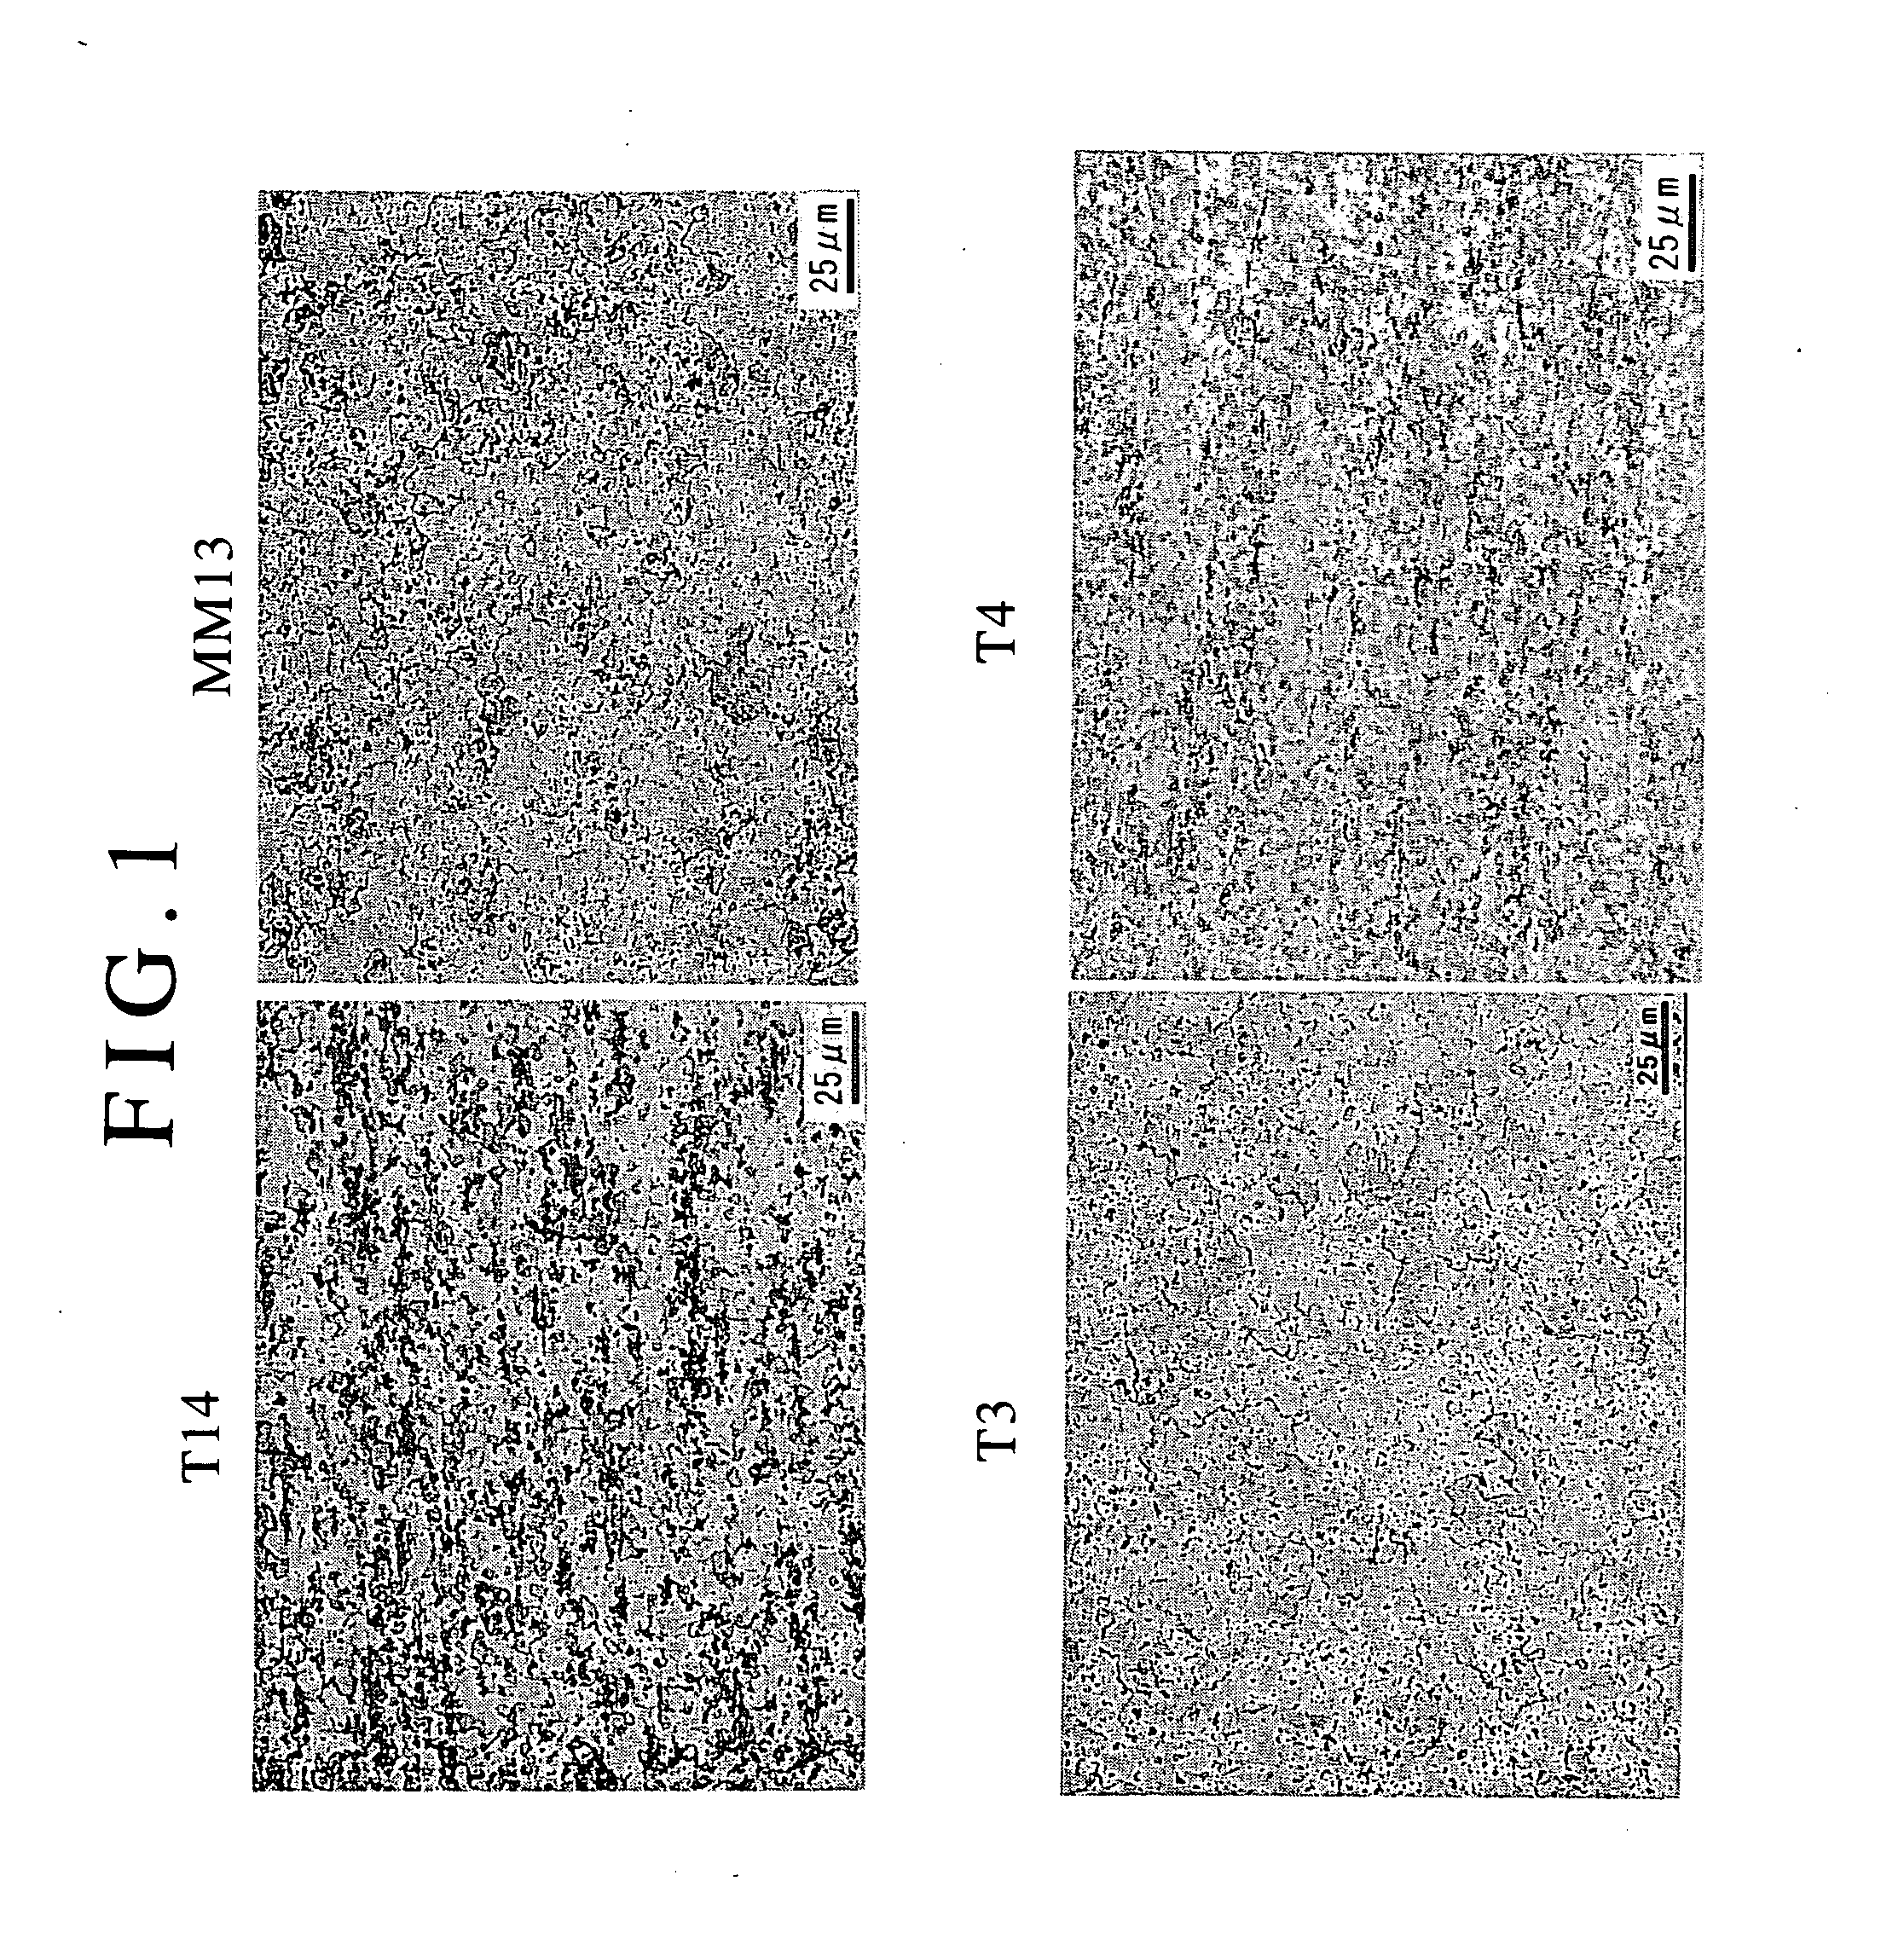 Method for producing dispersed oxide reinforced ferritic steel having coarse grain structure and being excellent in high temperature creep strength